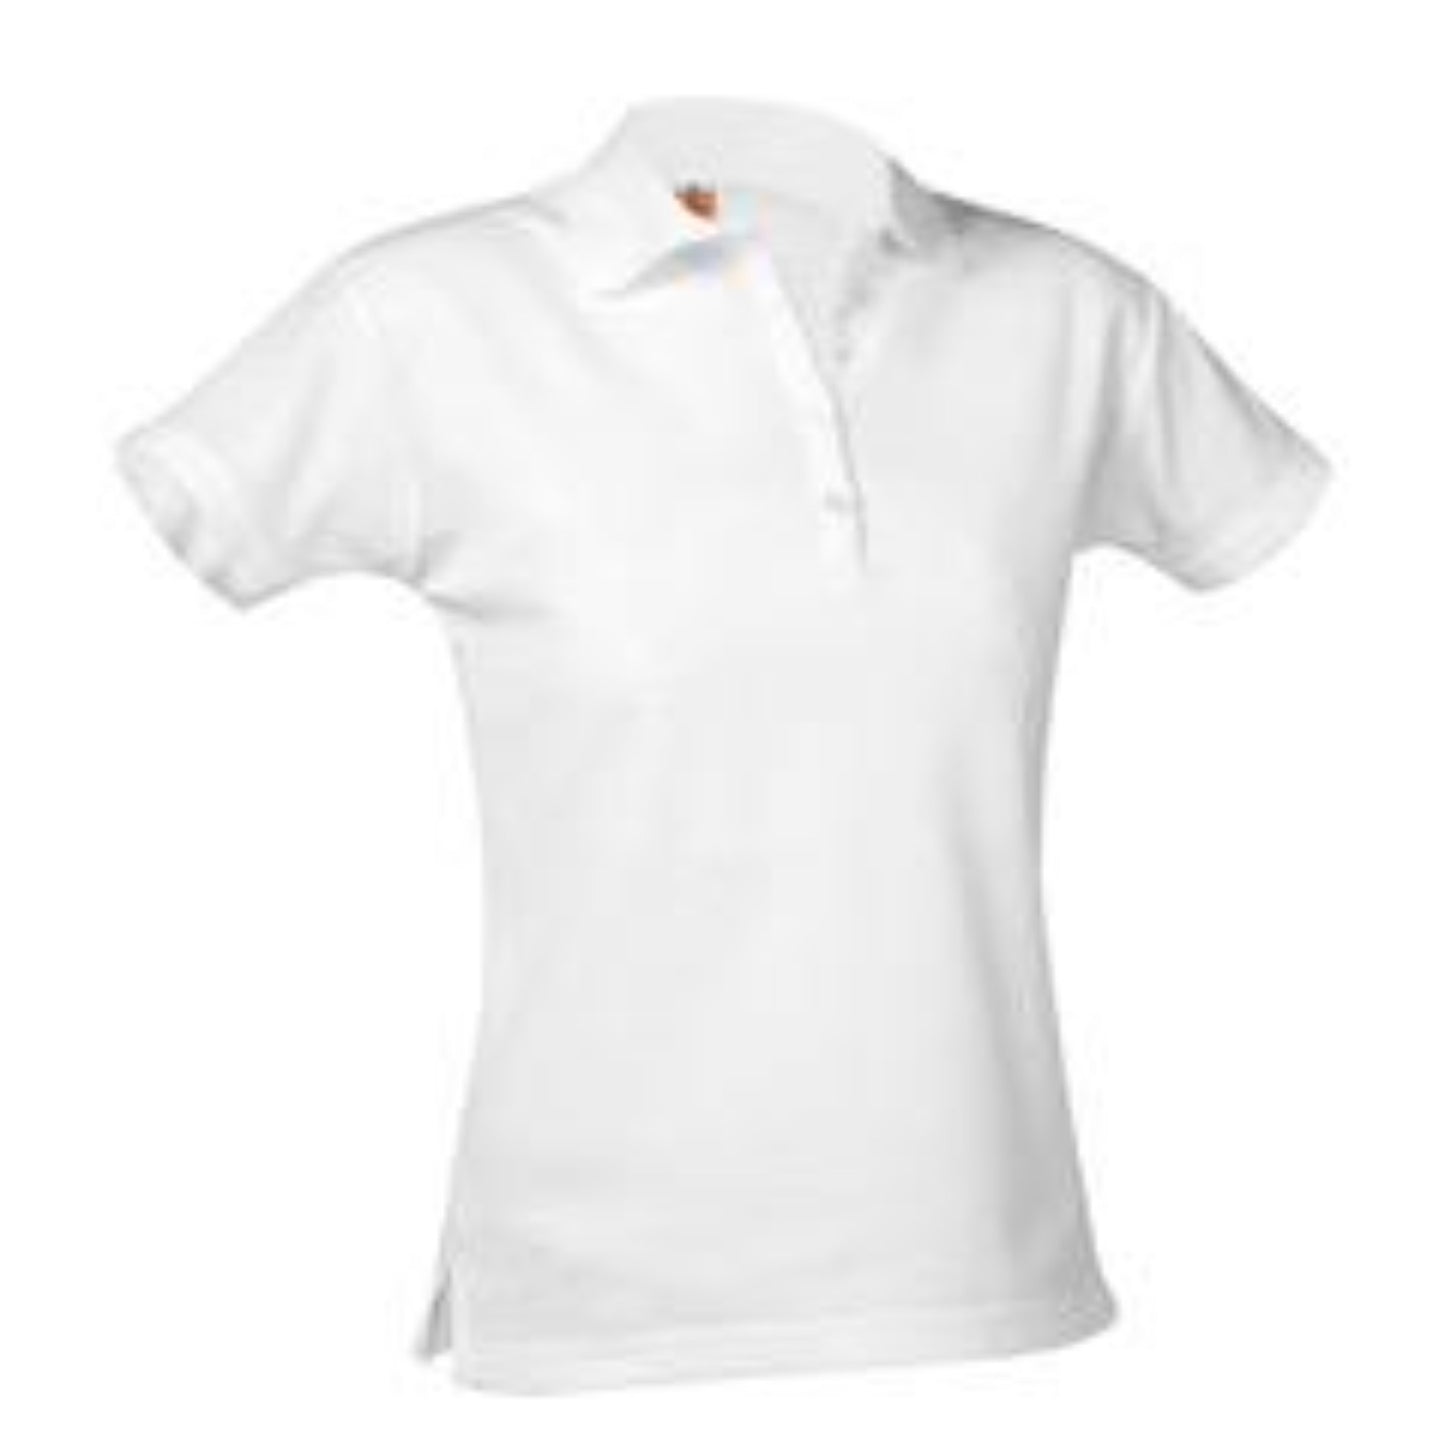 St Mary Girls Fitted Short Sleeve Pique Knit Polo-White